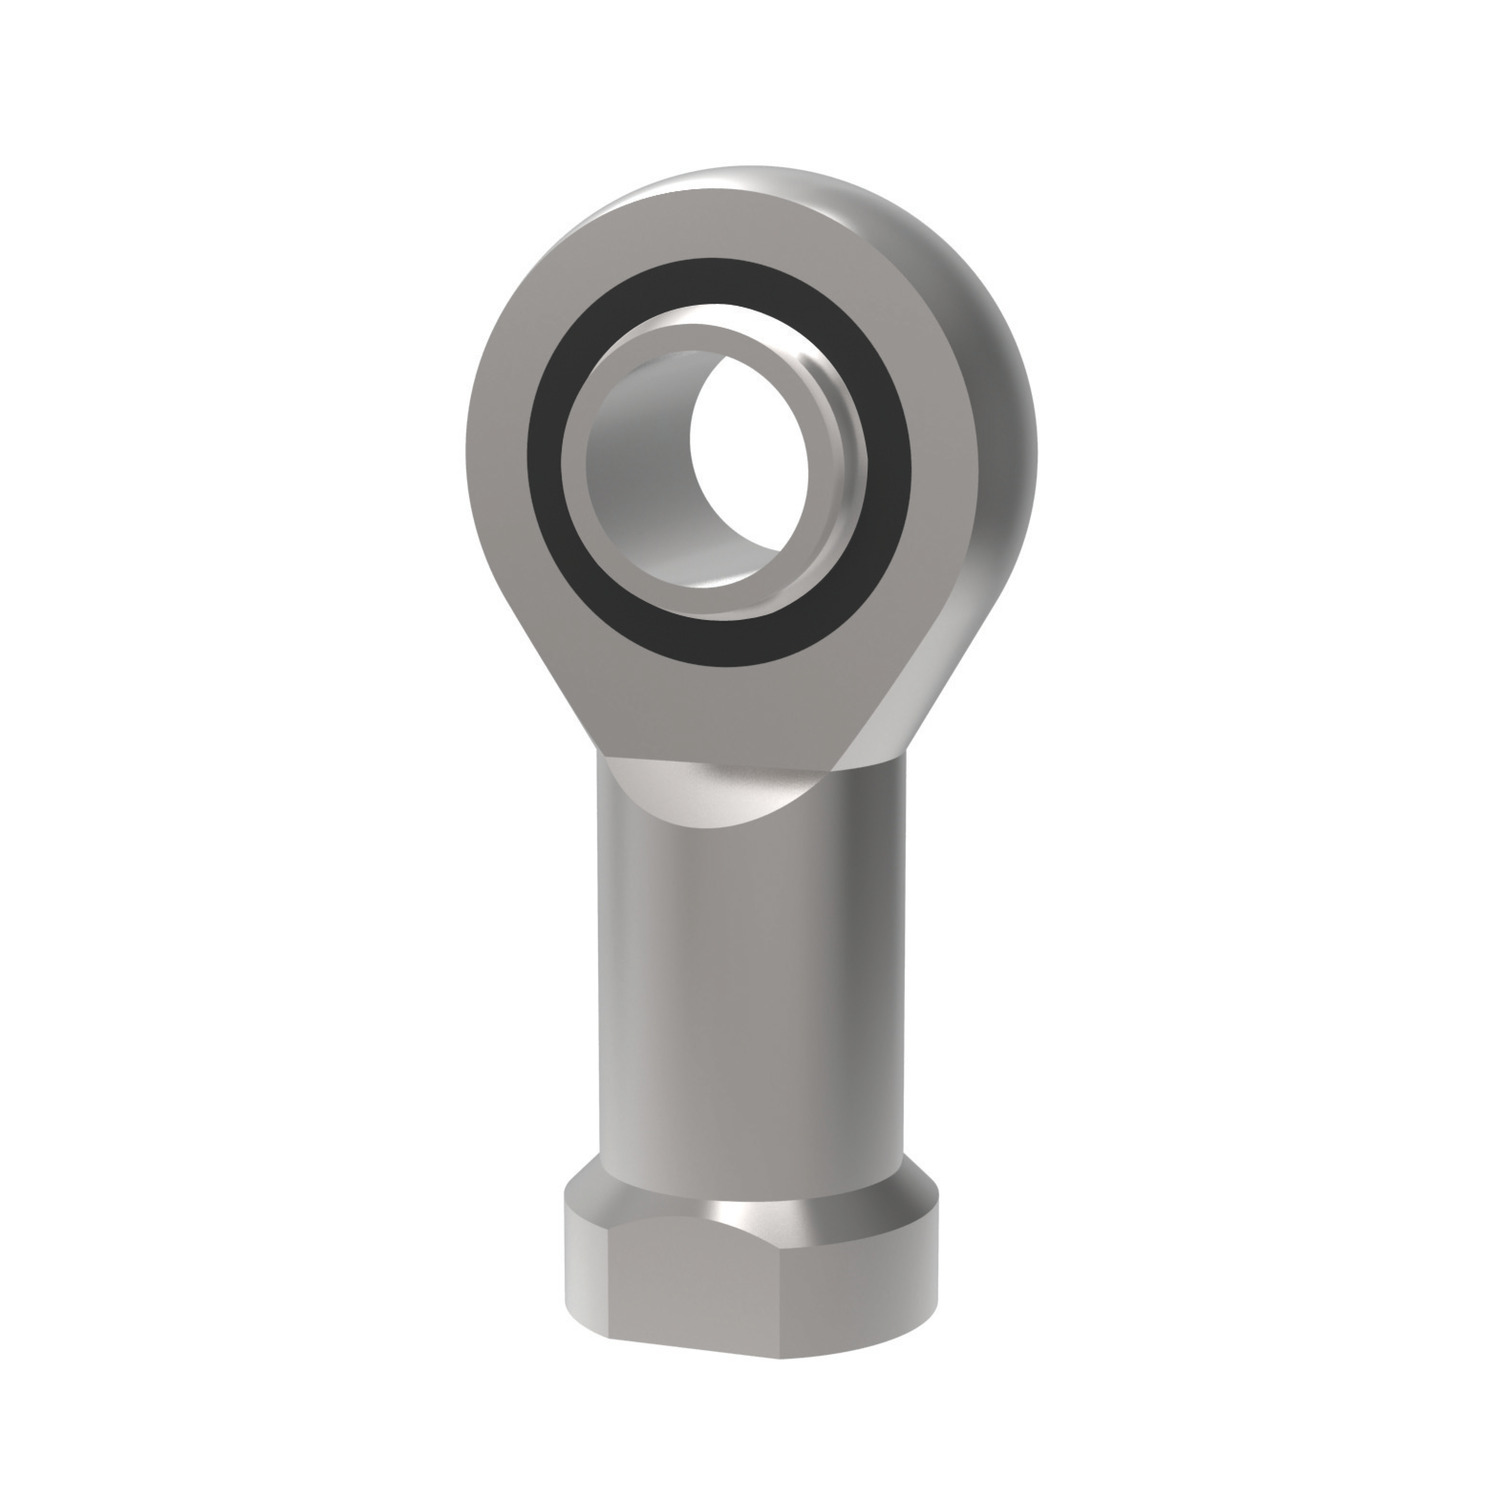 Low Cost Rod End - Female Low cost rod ends with integral spherical plain bearing. Right and left hand threads available in sizes from M6 to M80.